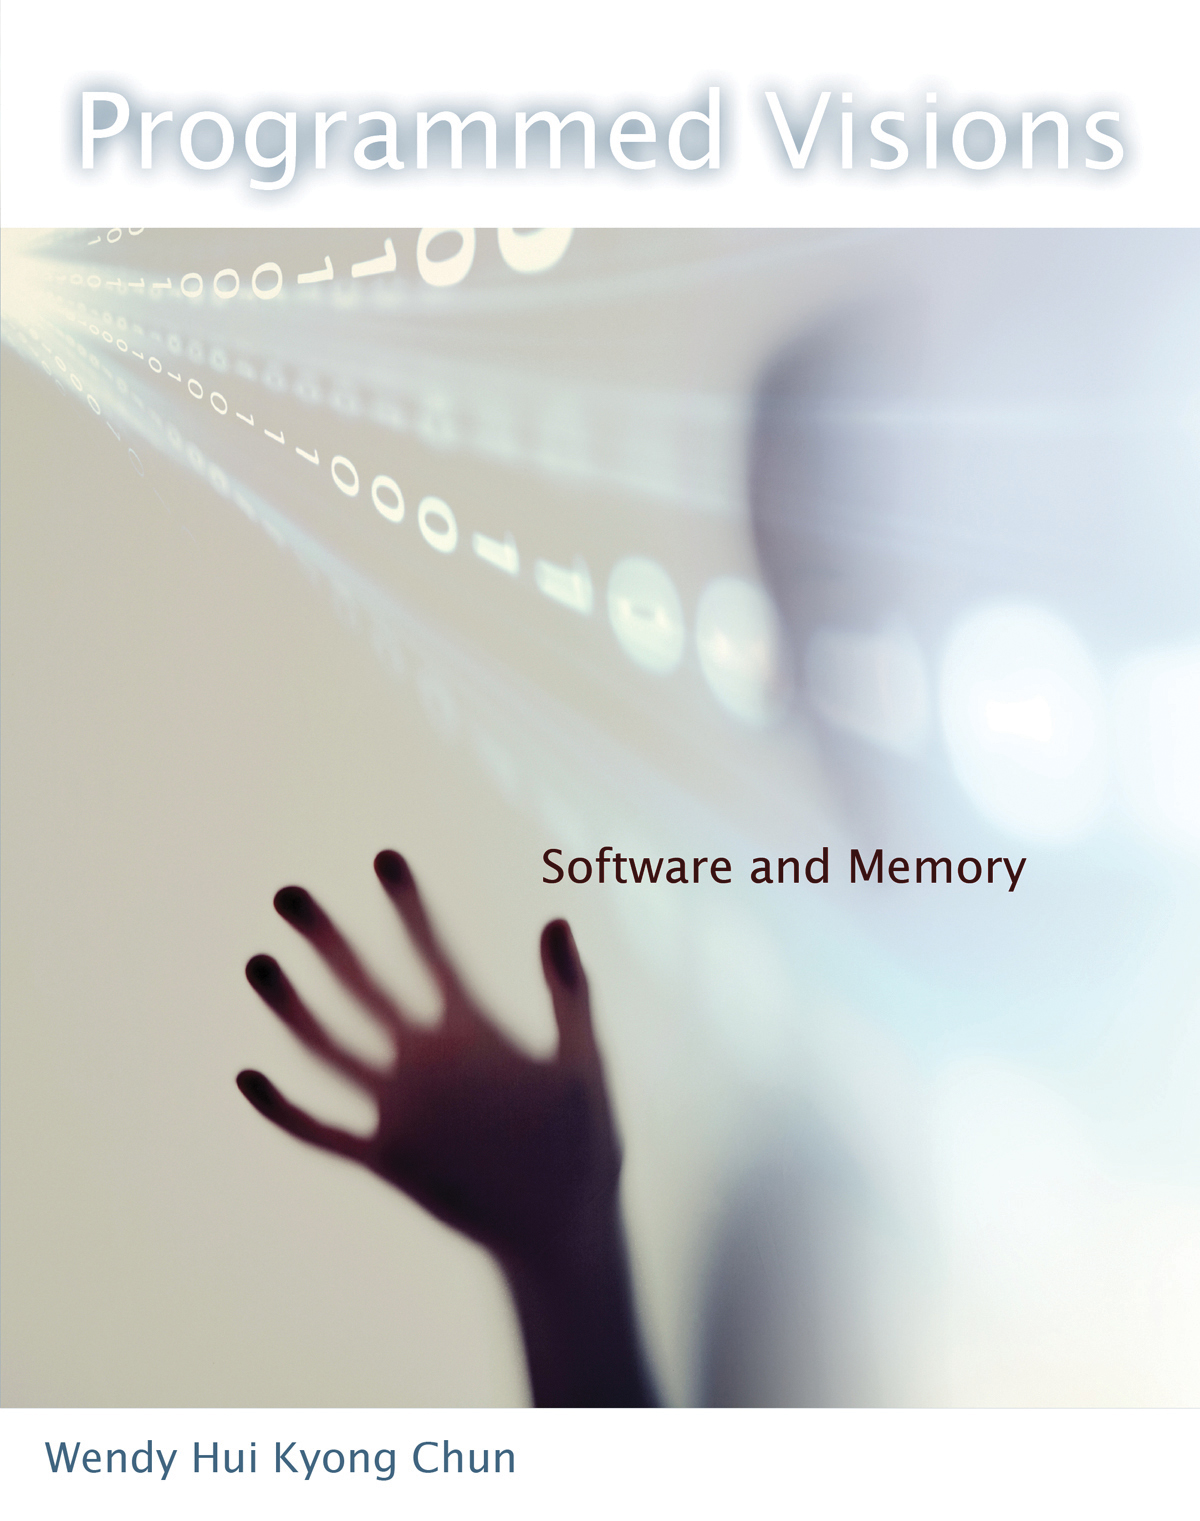 Programmed Visions: Software and Memory (MIT Press, 2013)